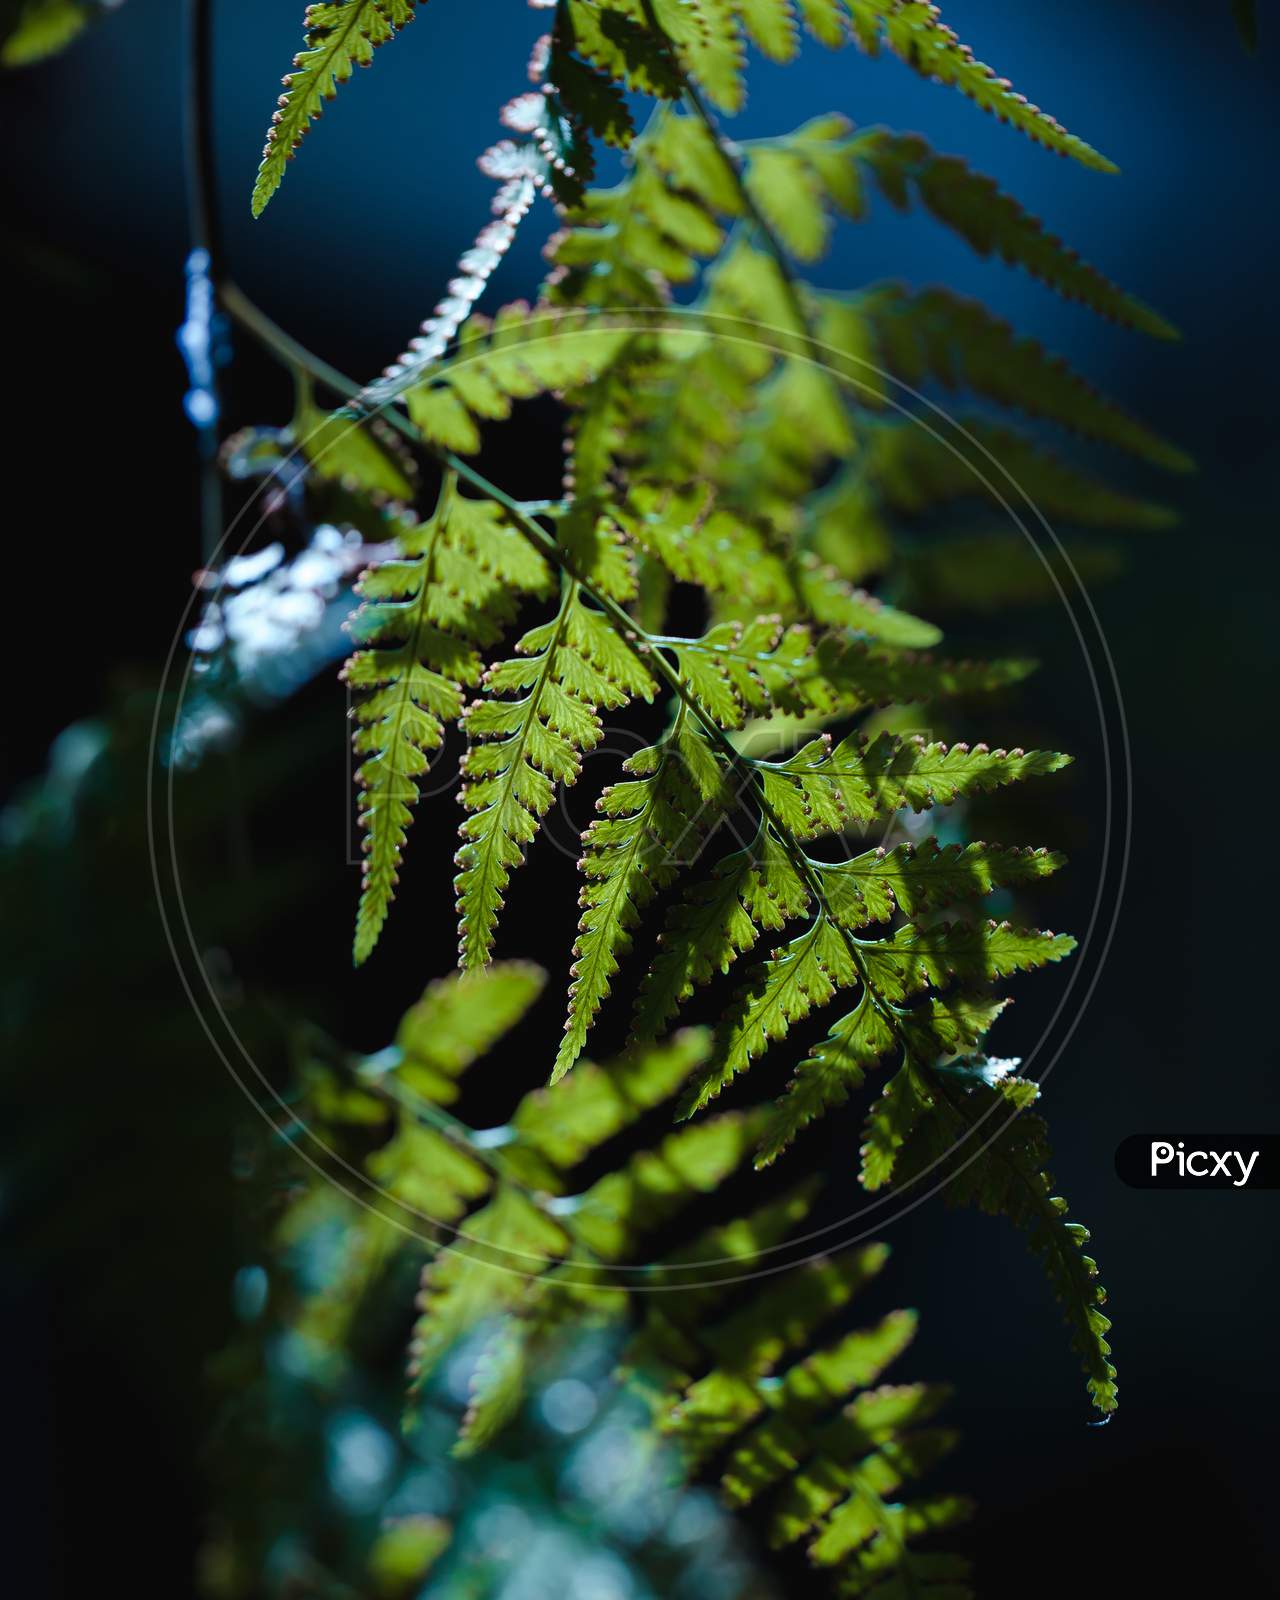 Forest fern, decorated plant, naturally grown outdoor, dark mood lighting